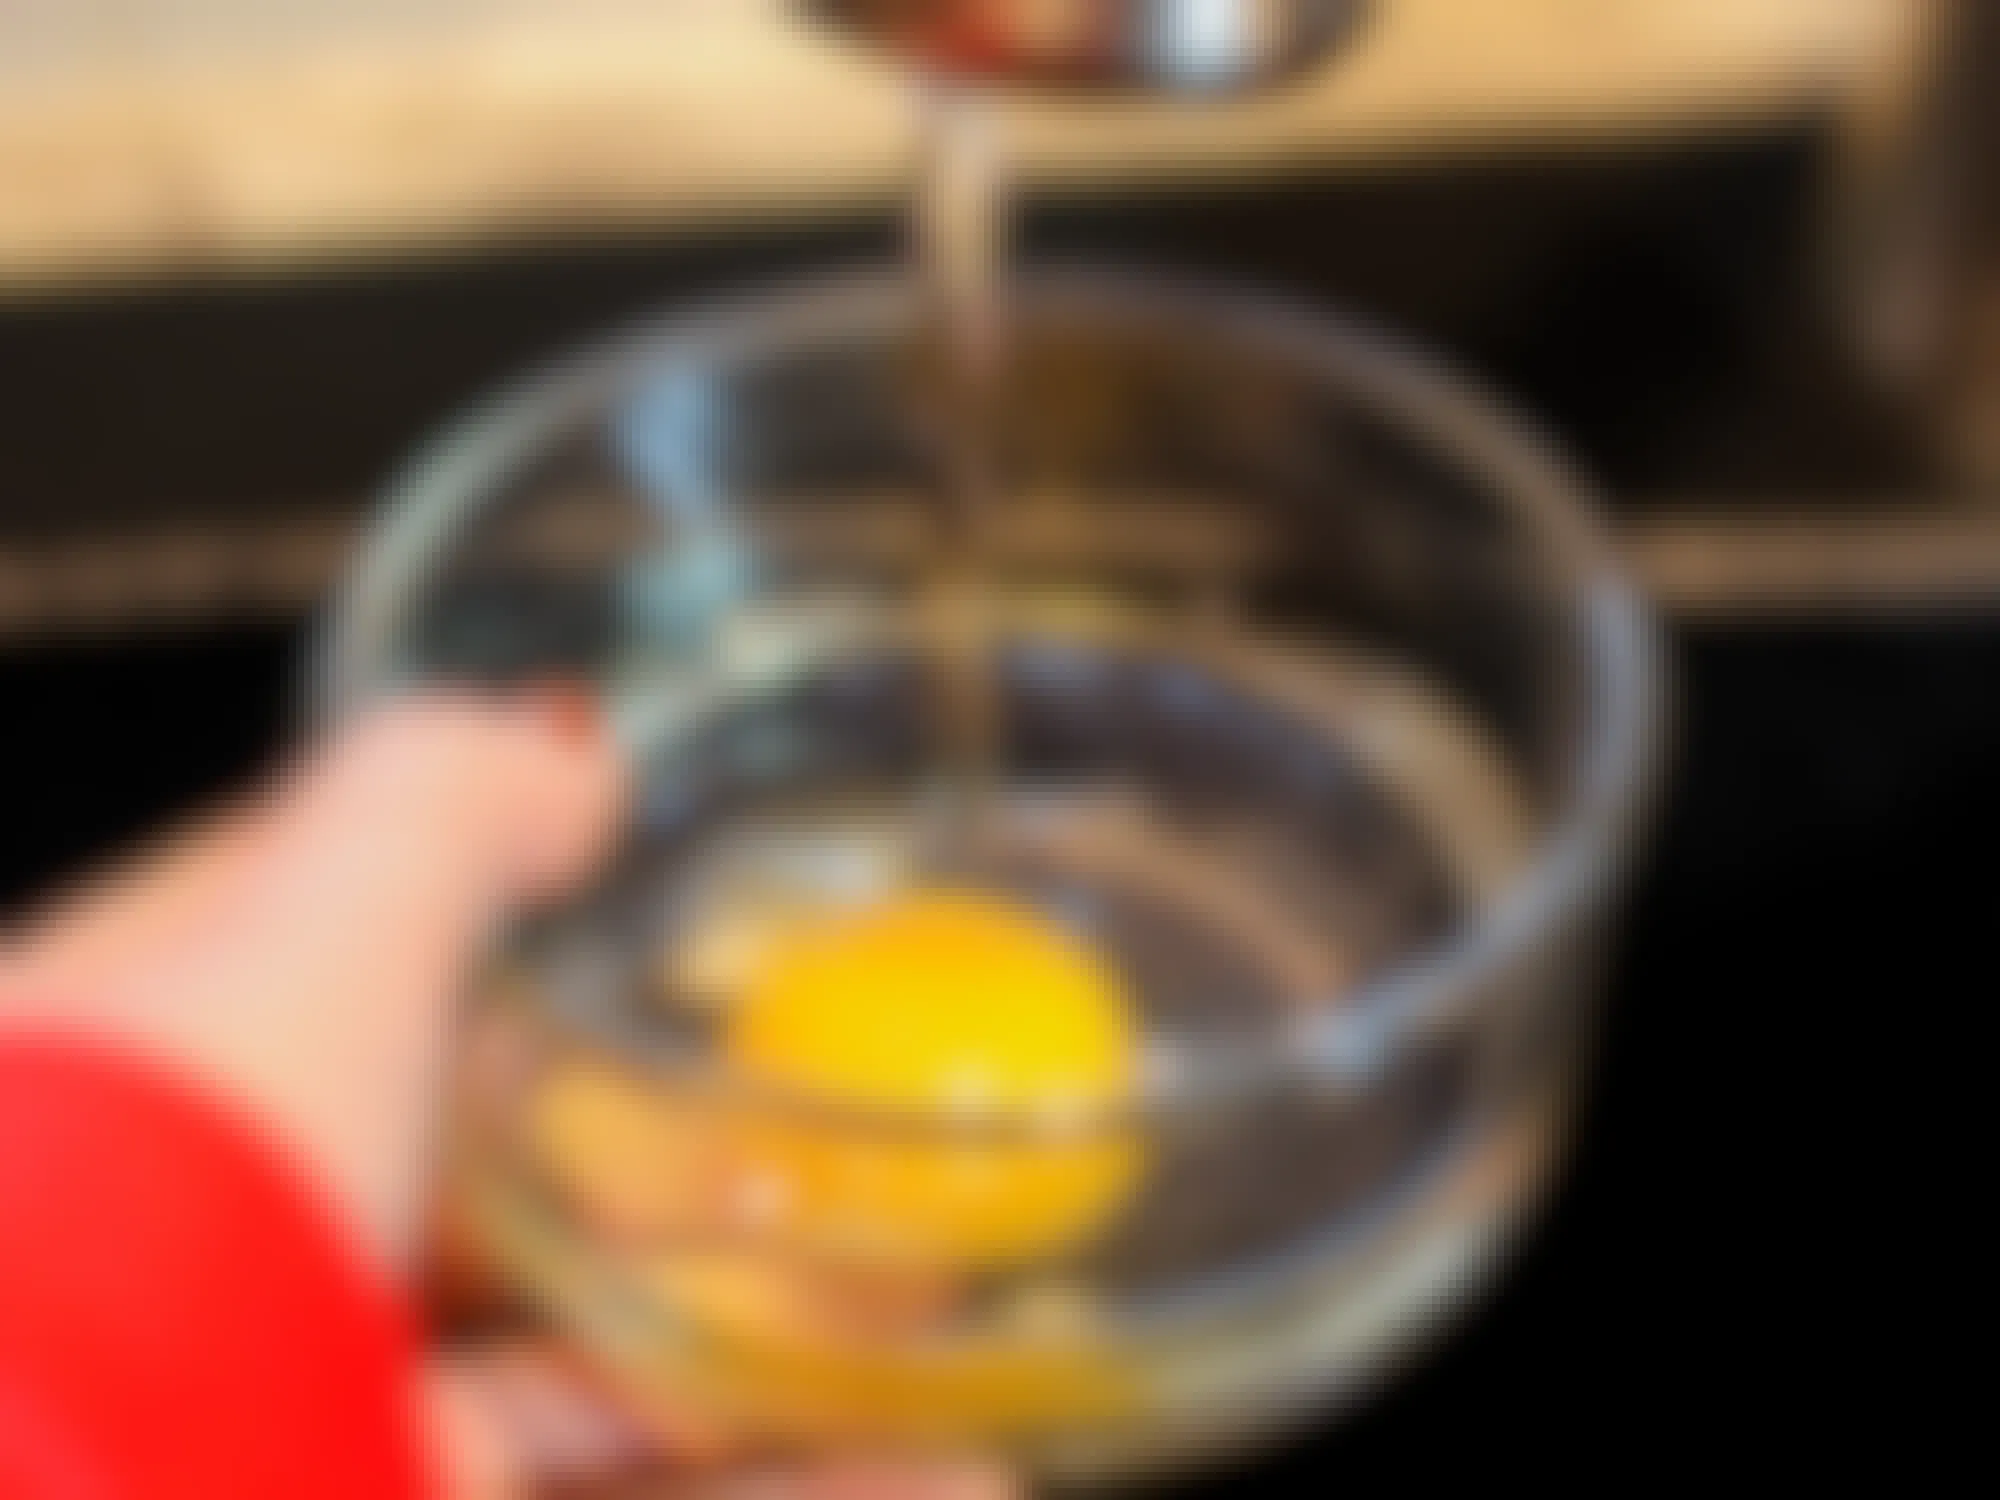 a cracked egg in a glass bowl with water from a water faucet going into the bowl